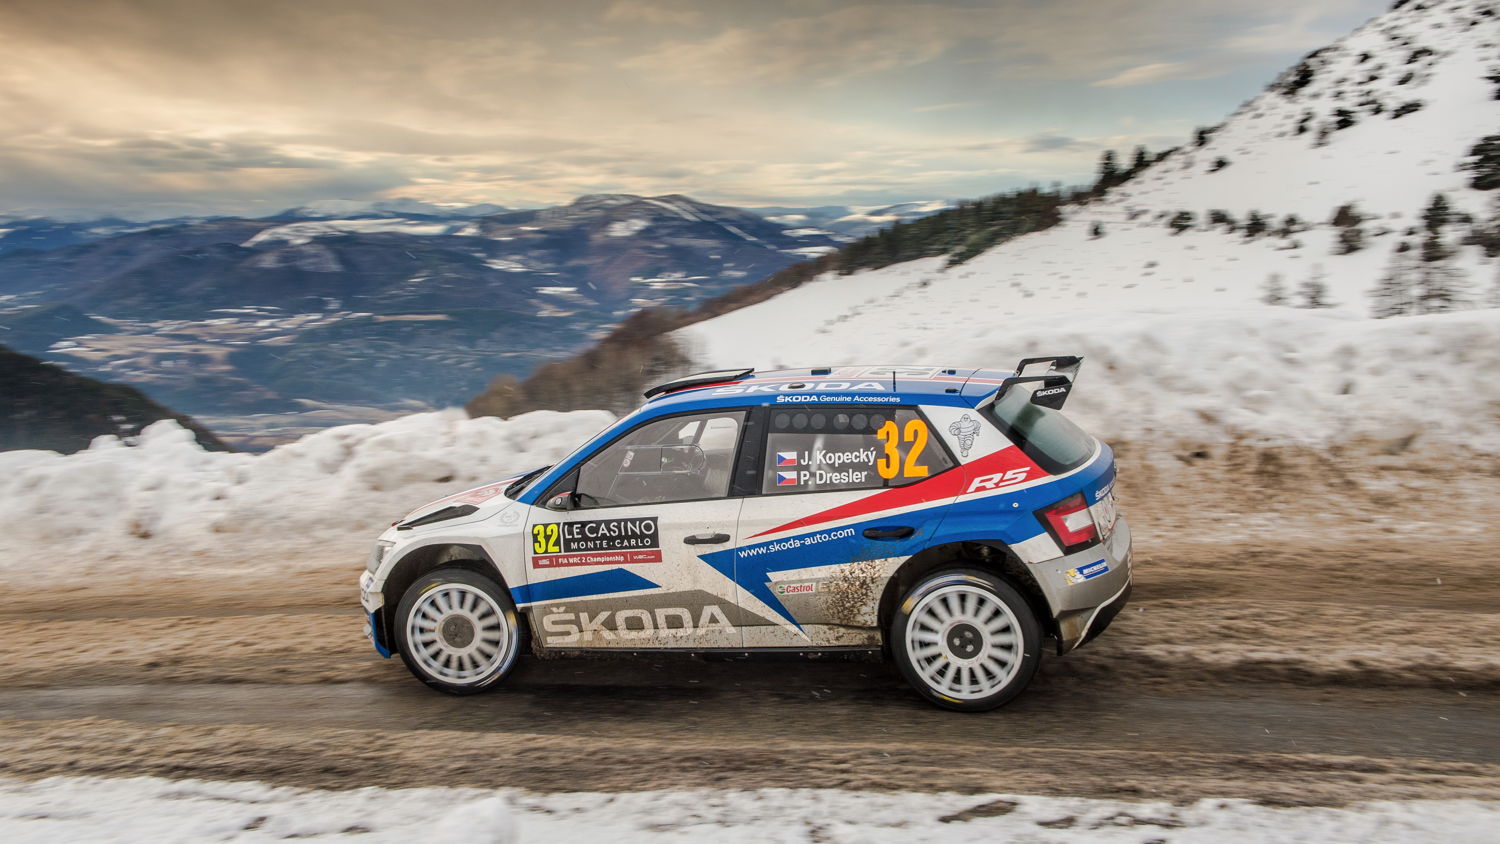 With Czech ŠKODA factory driver Jan Kopecký, the
reigning WRC 2 champion will drive a works ŠKODA
FABIA R5 at the GP Ice Race in Zell am See.